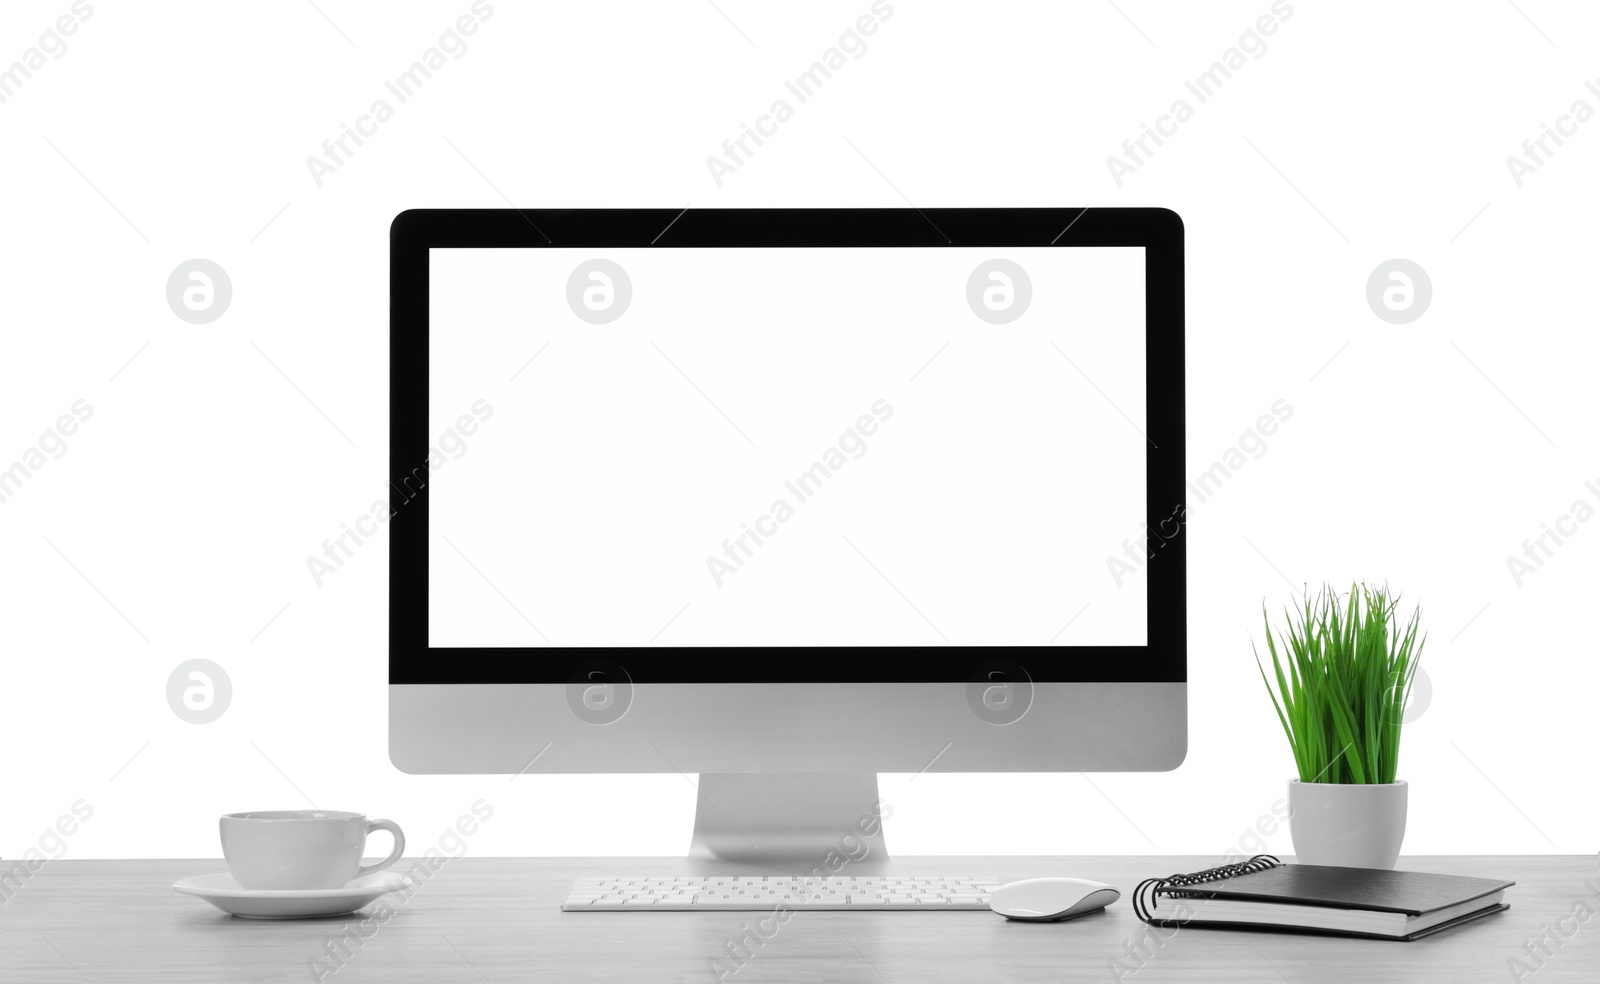 Photo of Computer, potted plant and cup of drink on table against white background. Stylish workplace